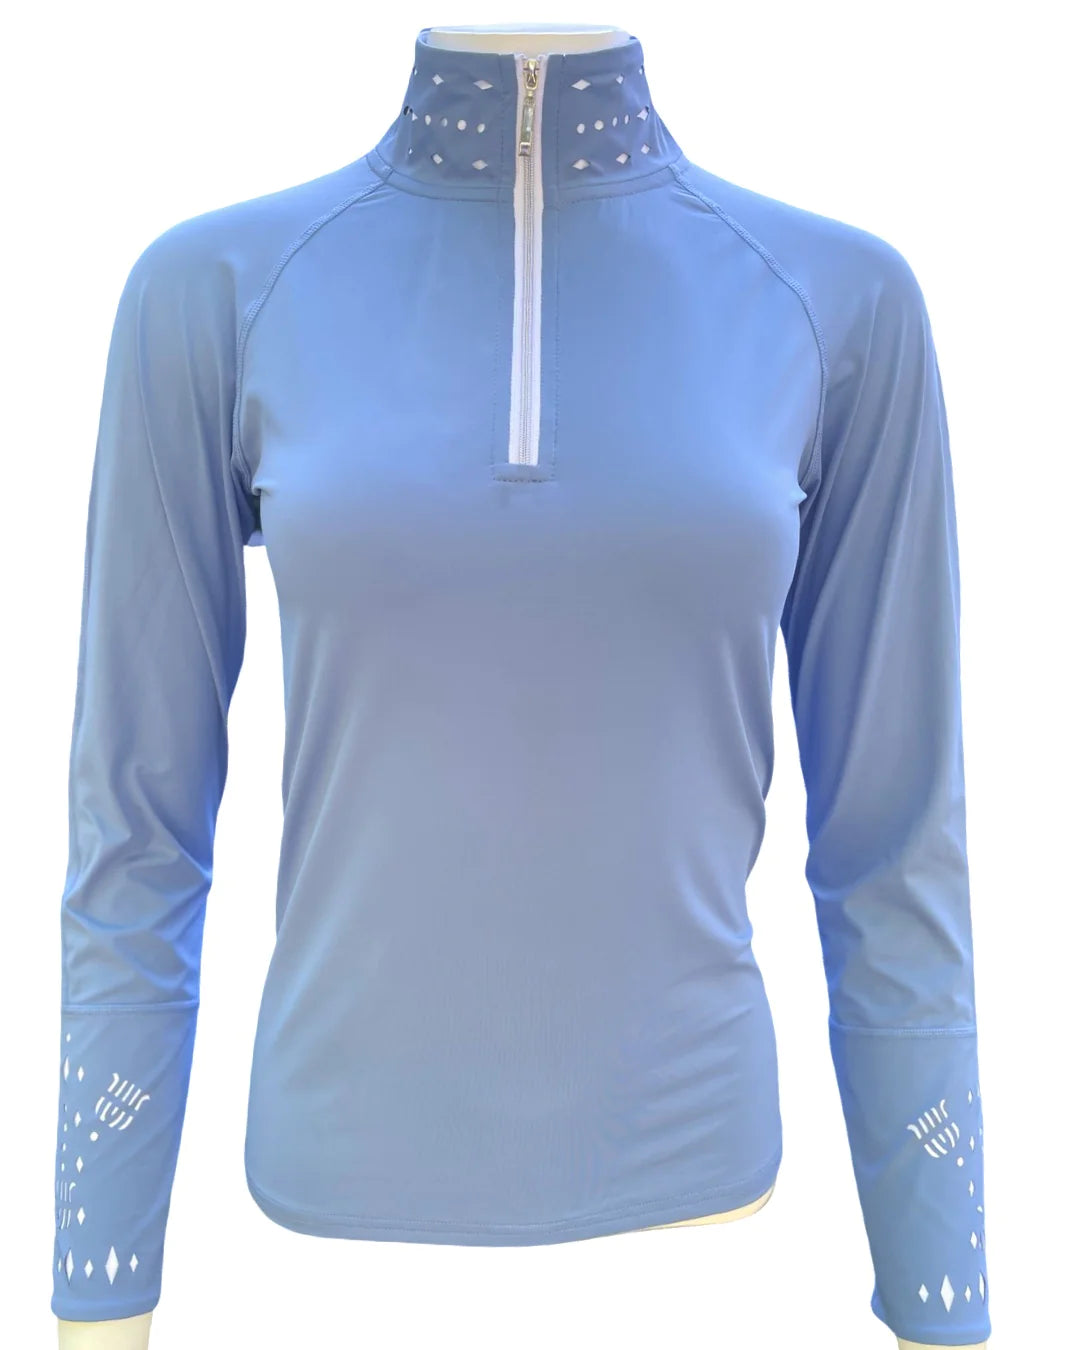 70 Degrees - Fontainebleau Sun Shirt. Available in multiple colors